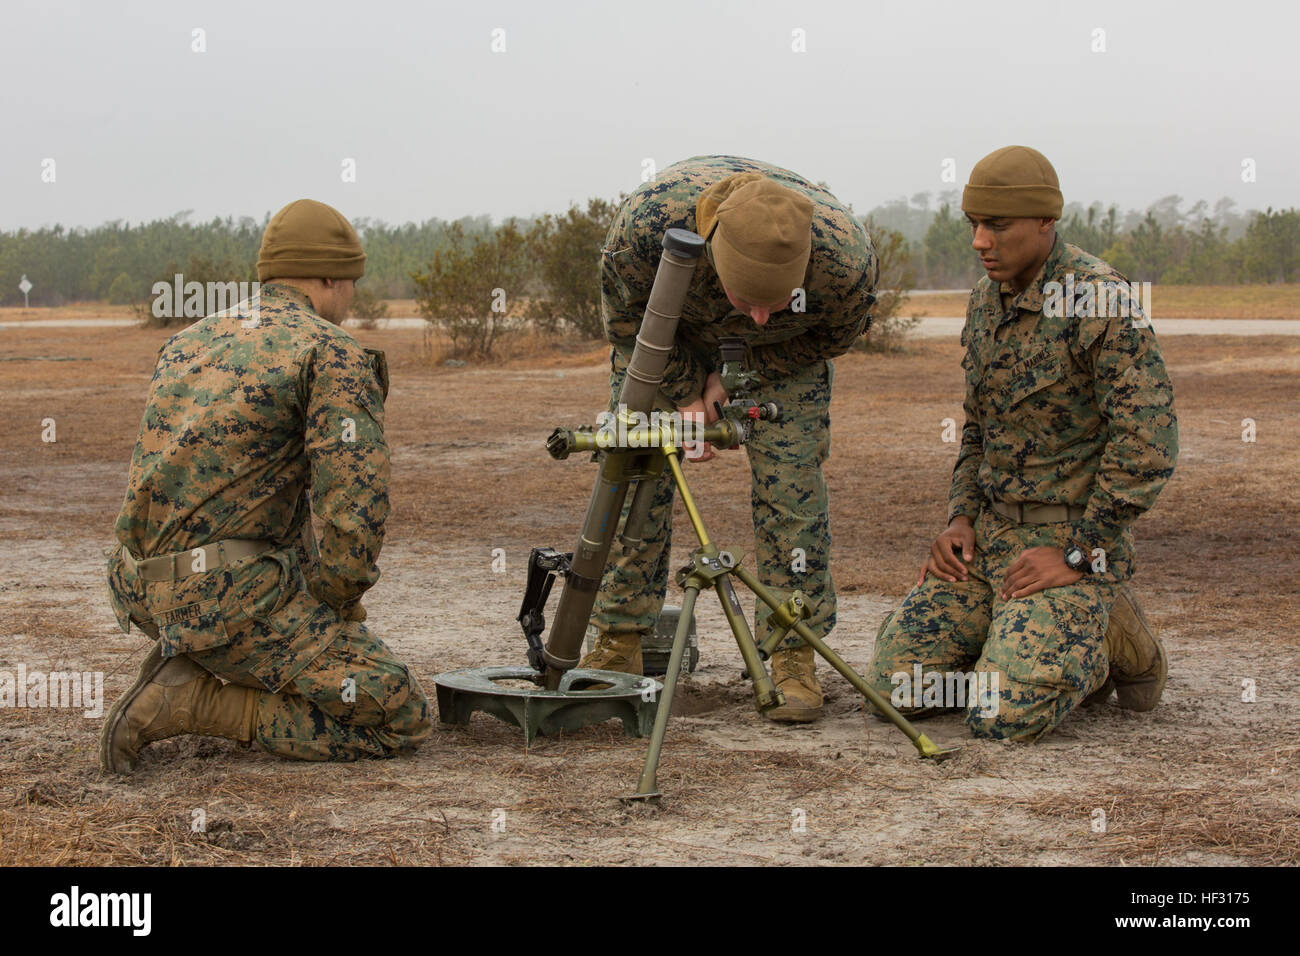 Cpl. Macabe N. Geurkink, a squad leader with Alpha Company, 1st Battalion, 2nd Marine Regiment, checks the work of his junior Marines after conducting drills during a field exercise aboard Camp Lejeune, N.C., March 4, 2015. The drills were intended to better familiarize the Marines with their weapons for quick and accurate engagement when in a deployed environment. (U.S. Marine Corps photo by Lance Cpl. Olivia McDonald/Released) High demands, no pressure, 1-2 prepares for Pacific assignment 150304-M-VS306-023 Stock Photo